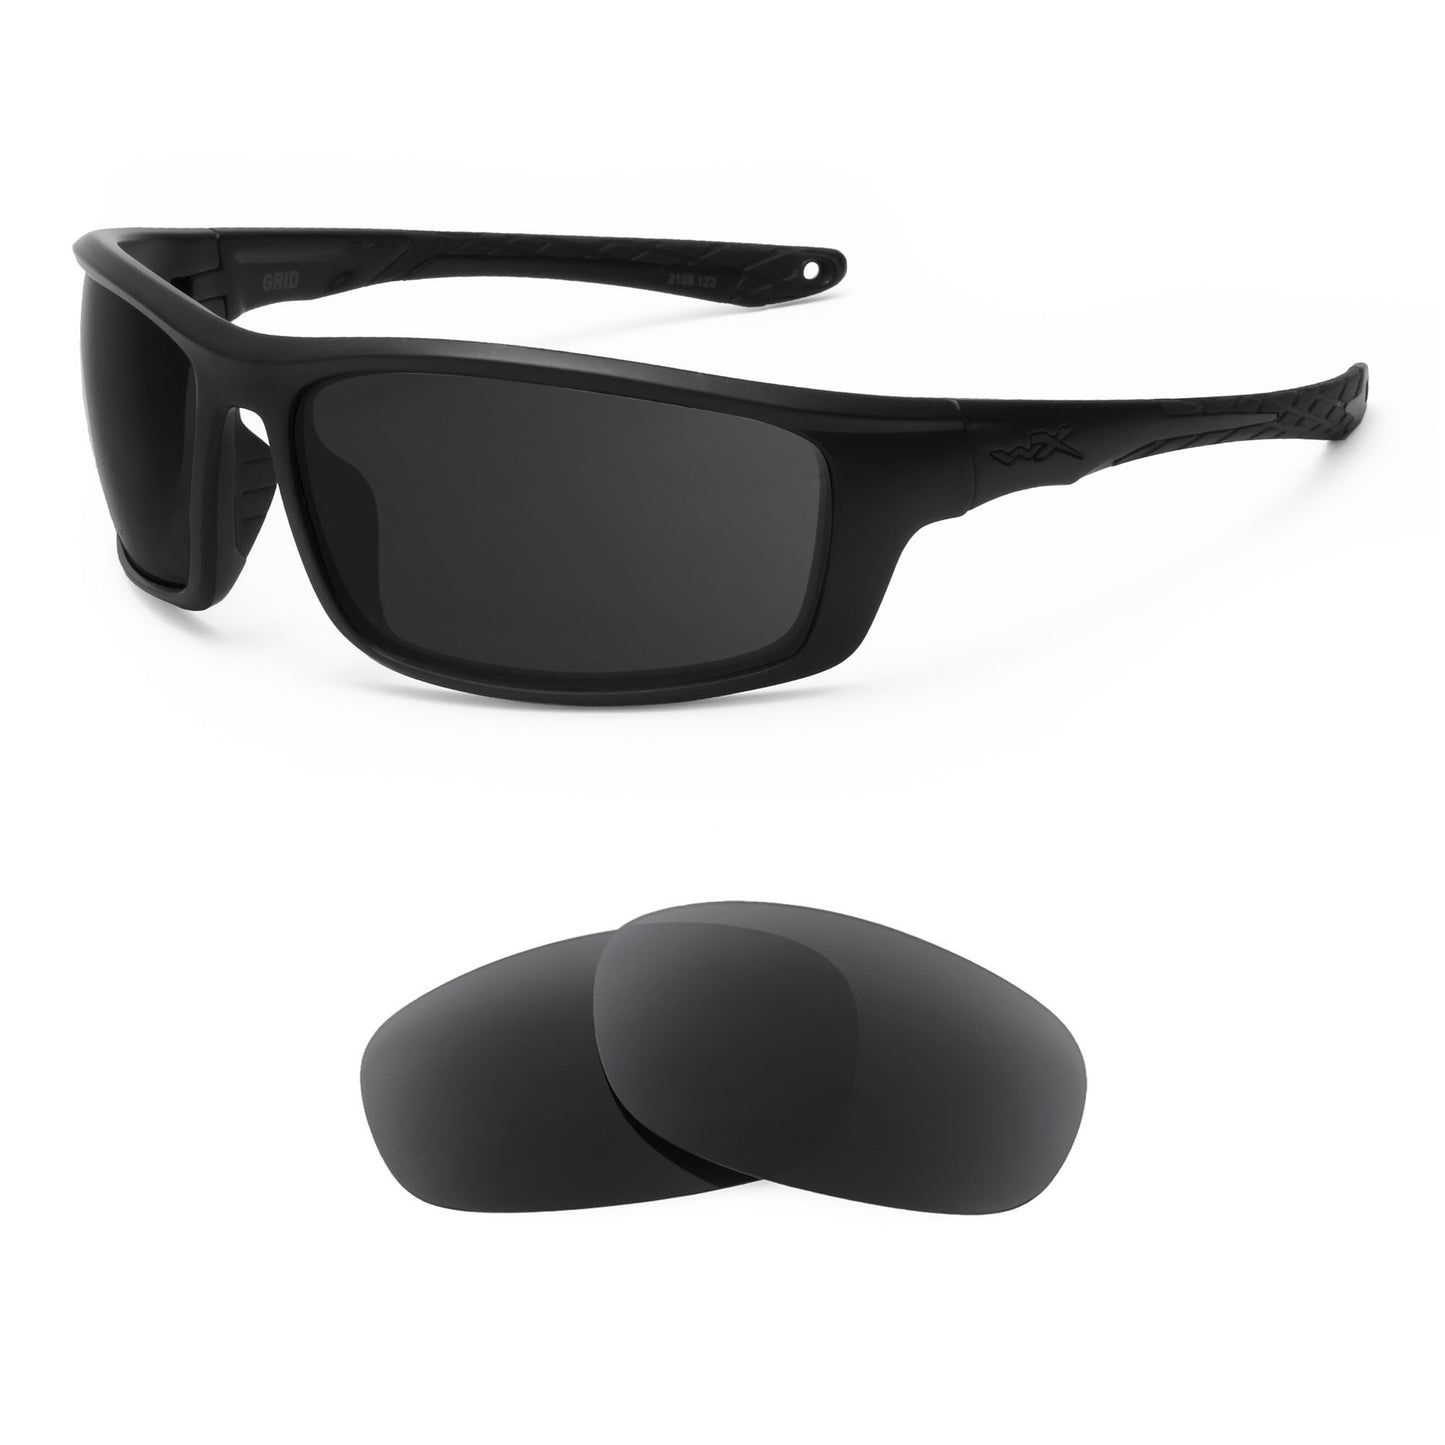 Wiley X Grid sunglasses with replacement lenses